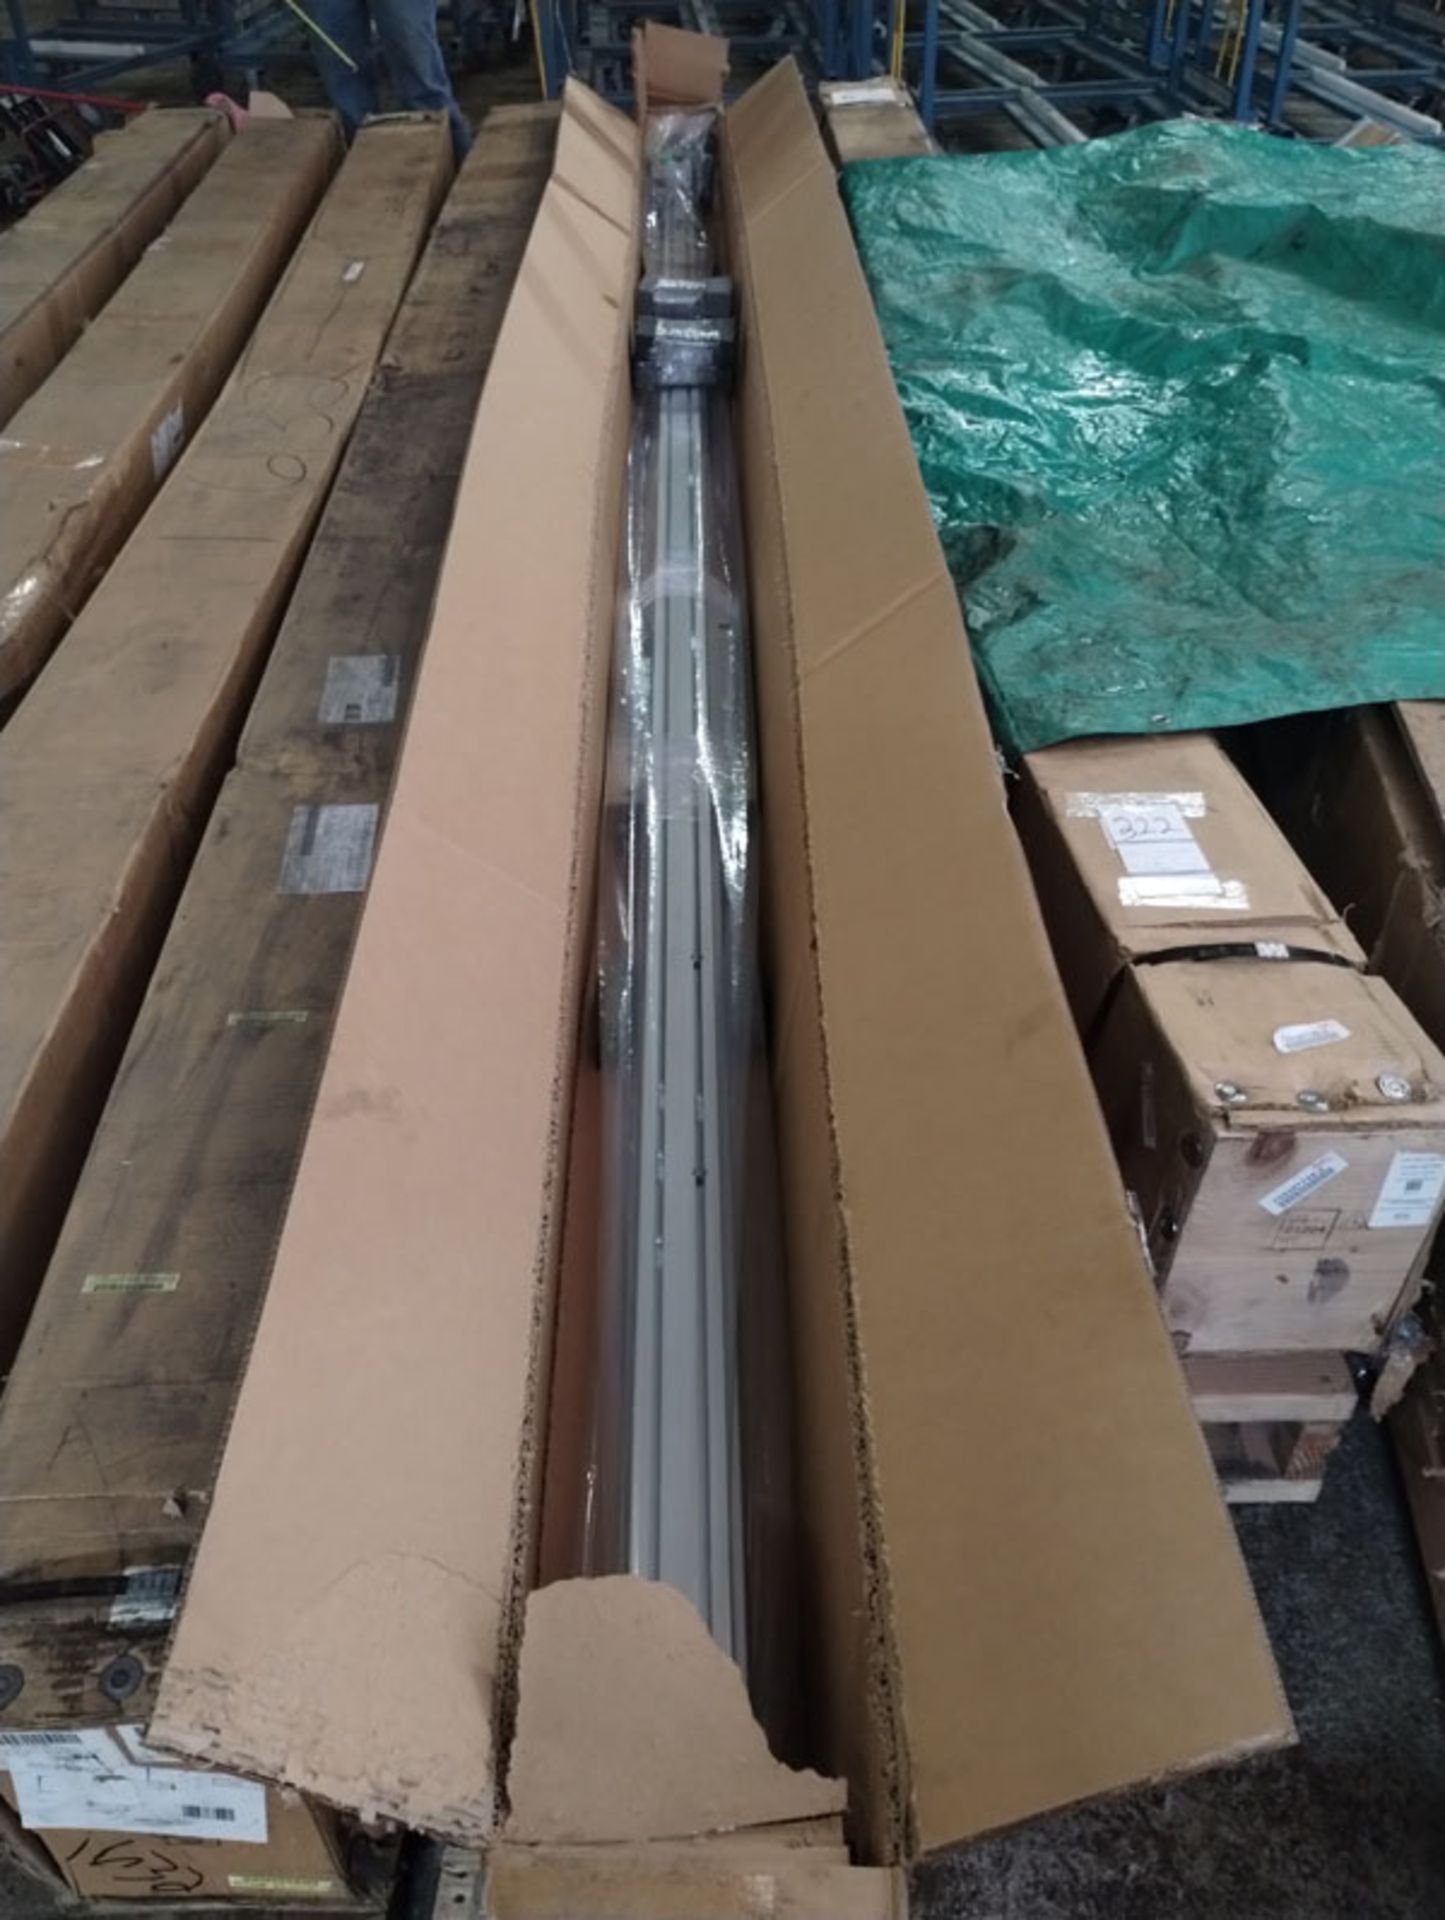 179" LINEAR ACTUATOR PART# 11237C01 --- Lot located at second location: 6800 Union ave. , Cleveland